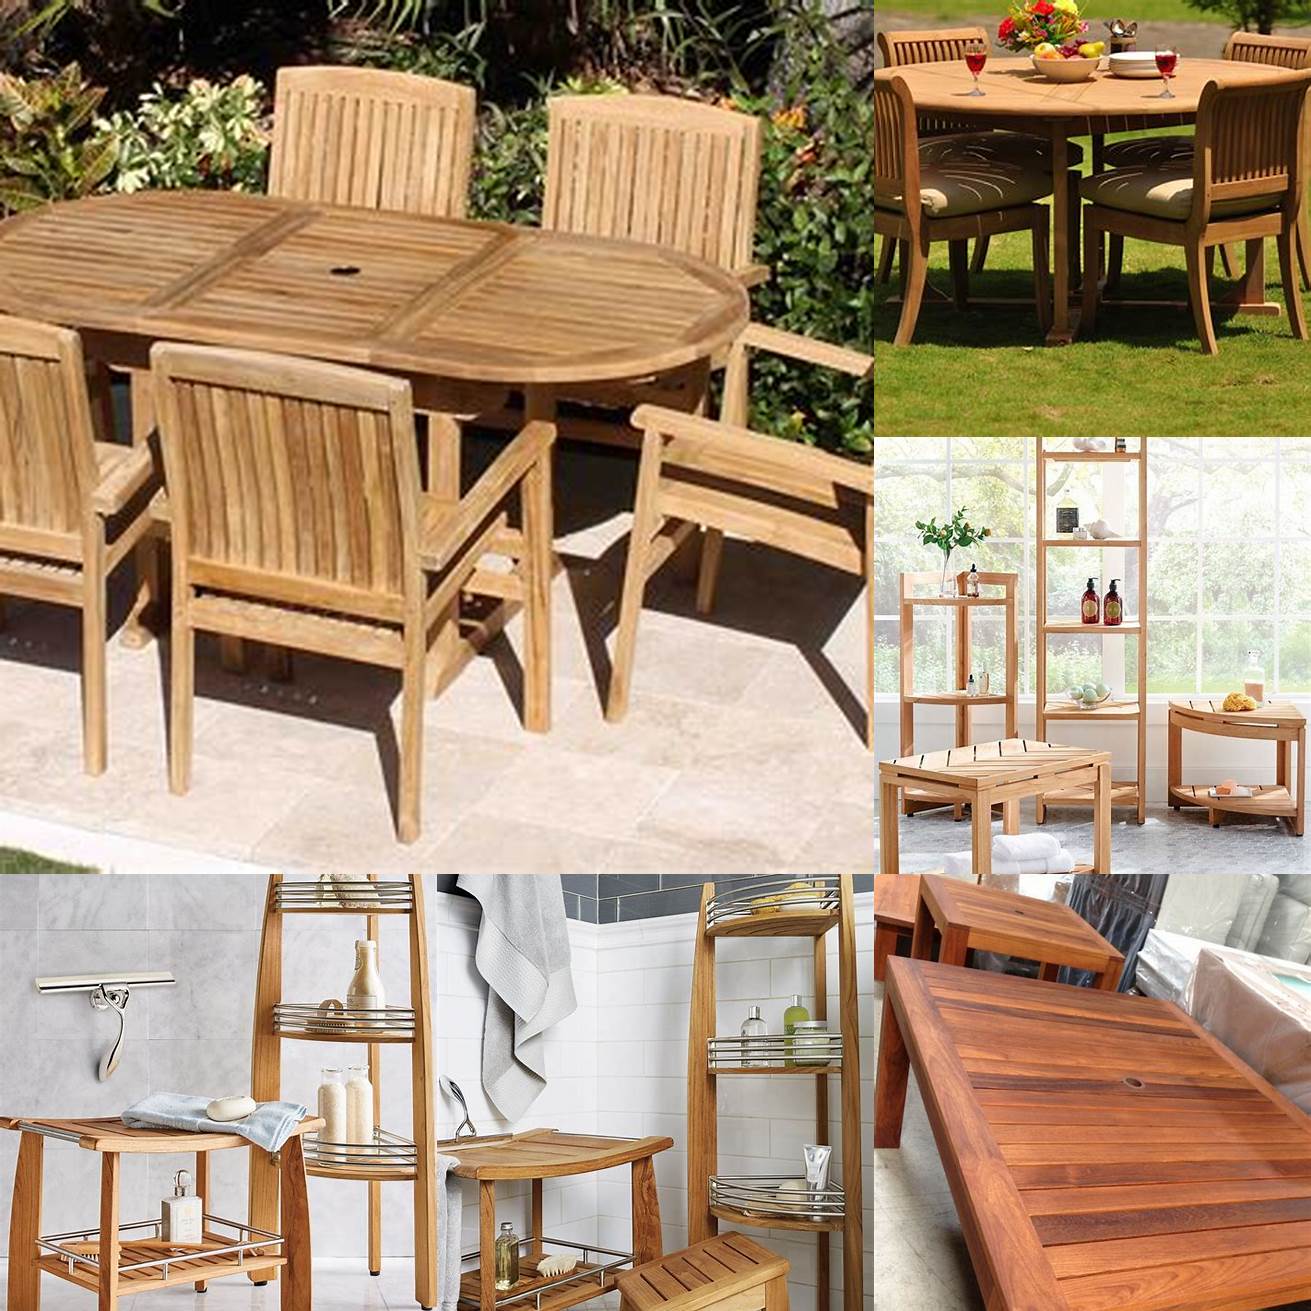 Teak Furniture with Different Accessories